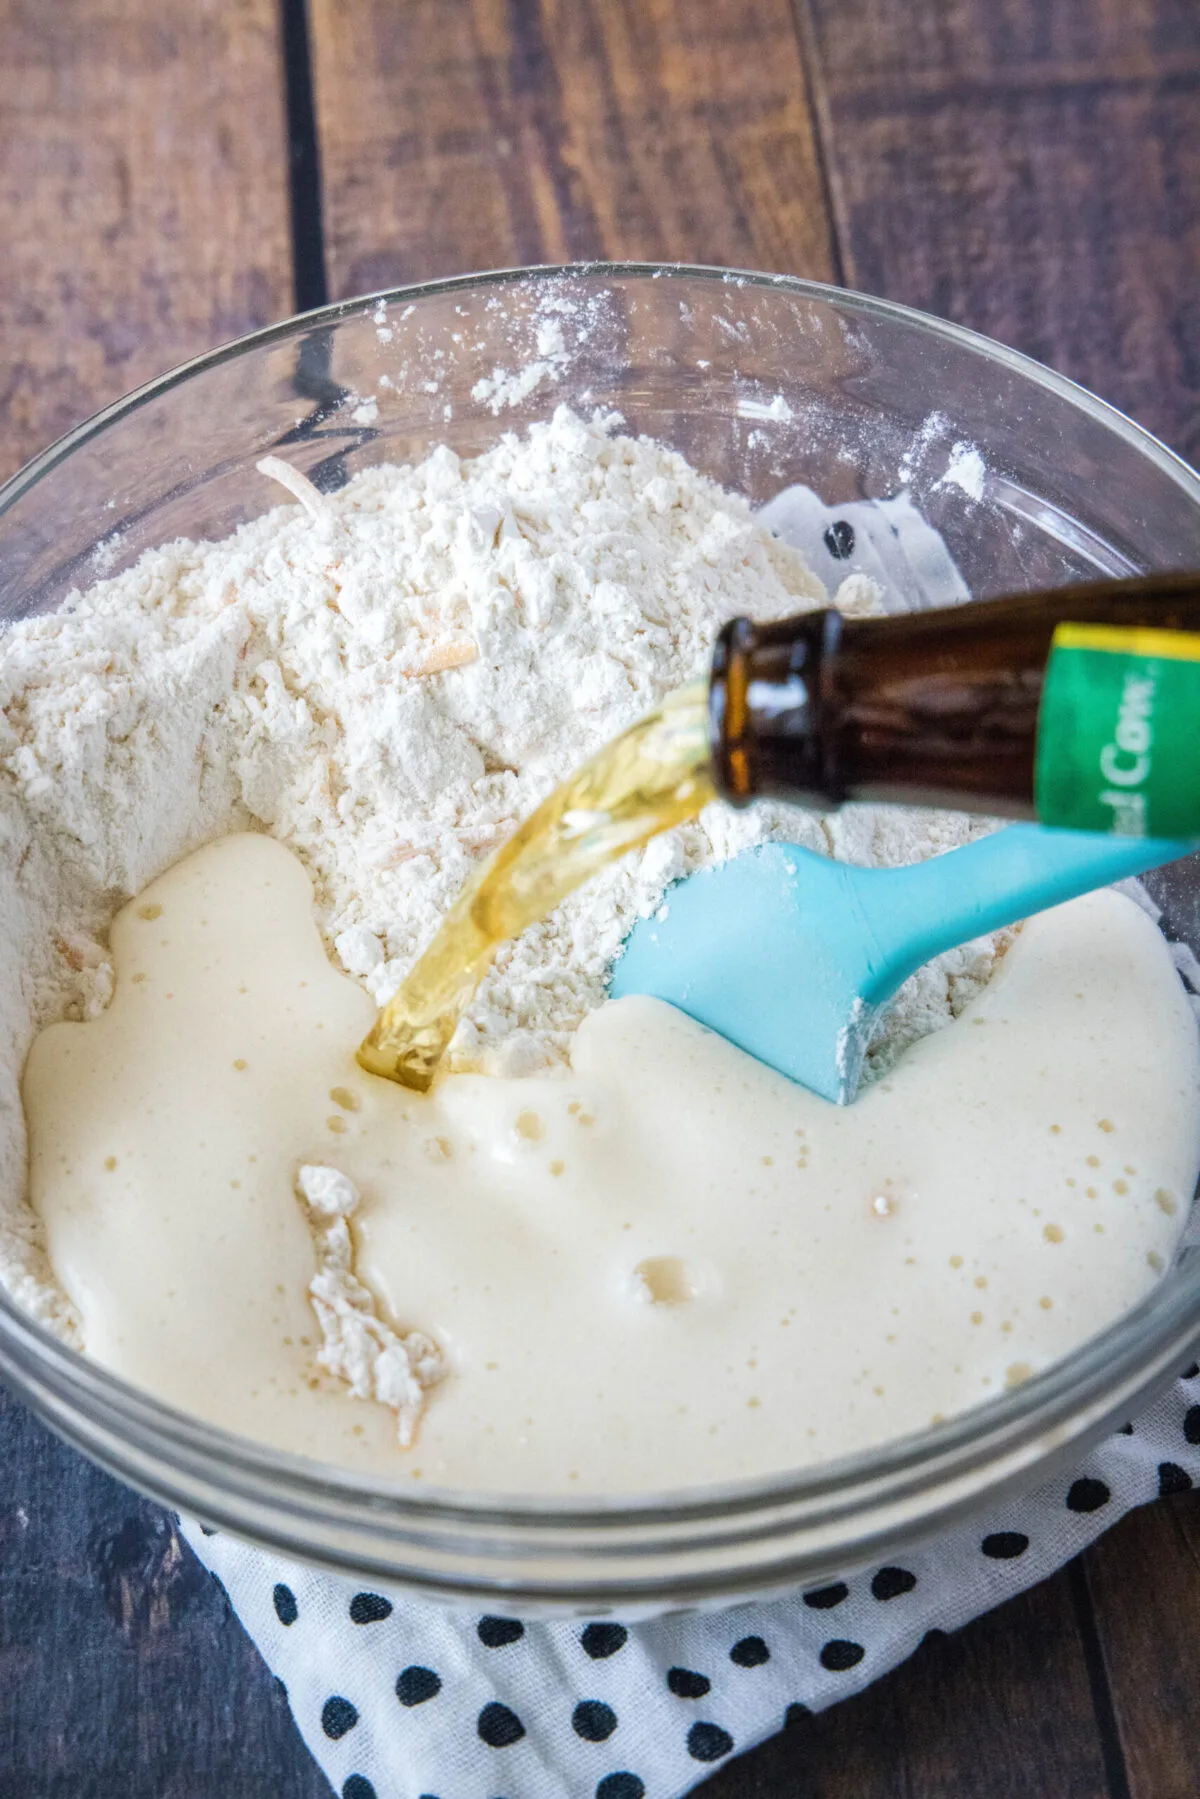 A bottle of beer being poured into a bowl of flour, cheese, and other ingredients, with a rubber spatula